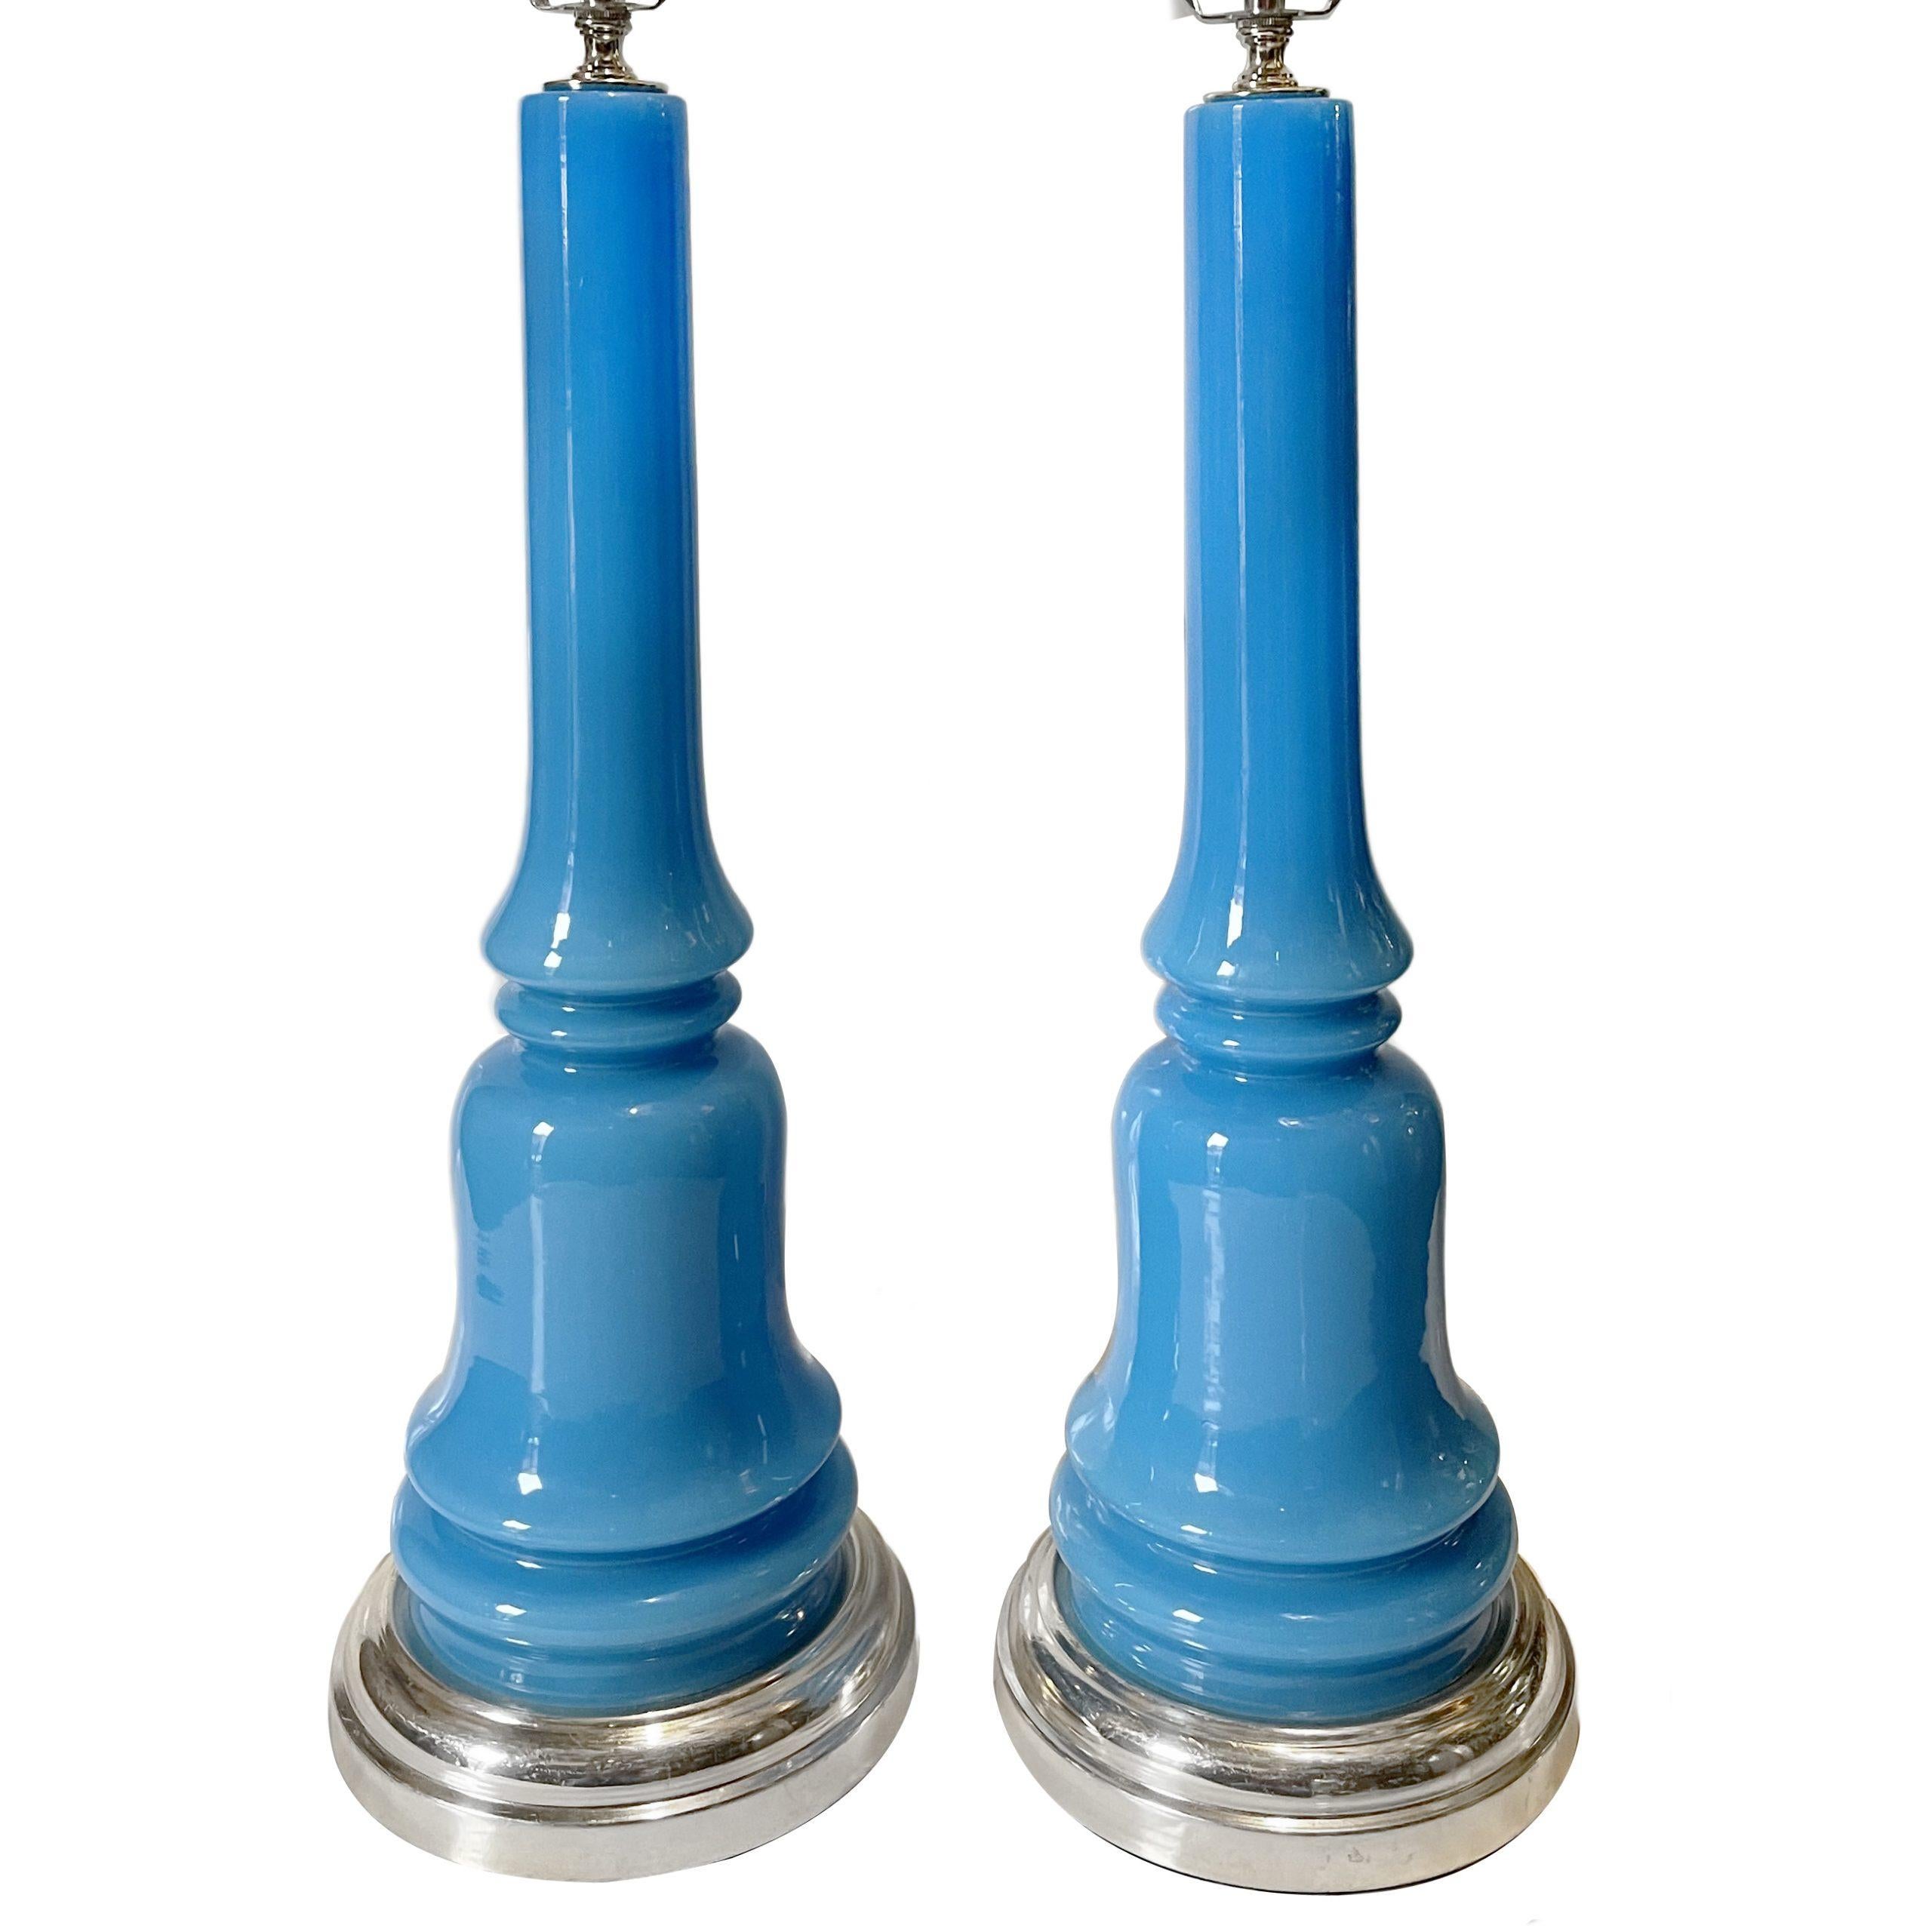 Pair of circa 1950s French blue glass table lamps with nickel-plated bases.

Measurements:
Height 22